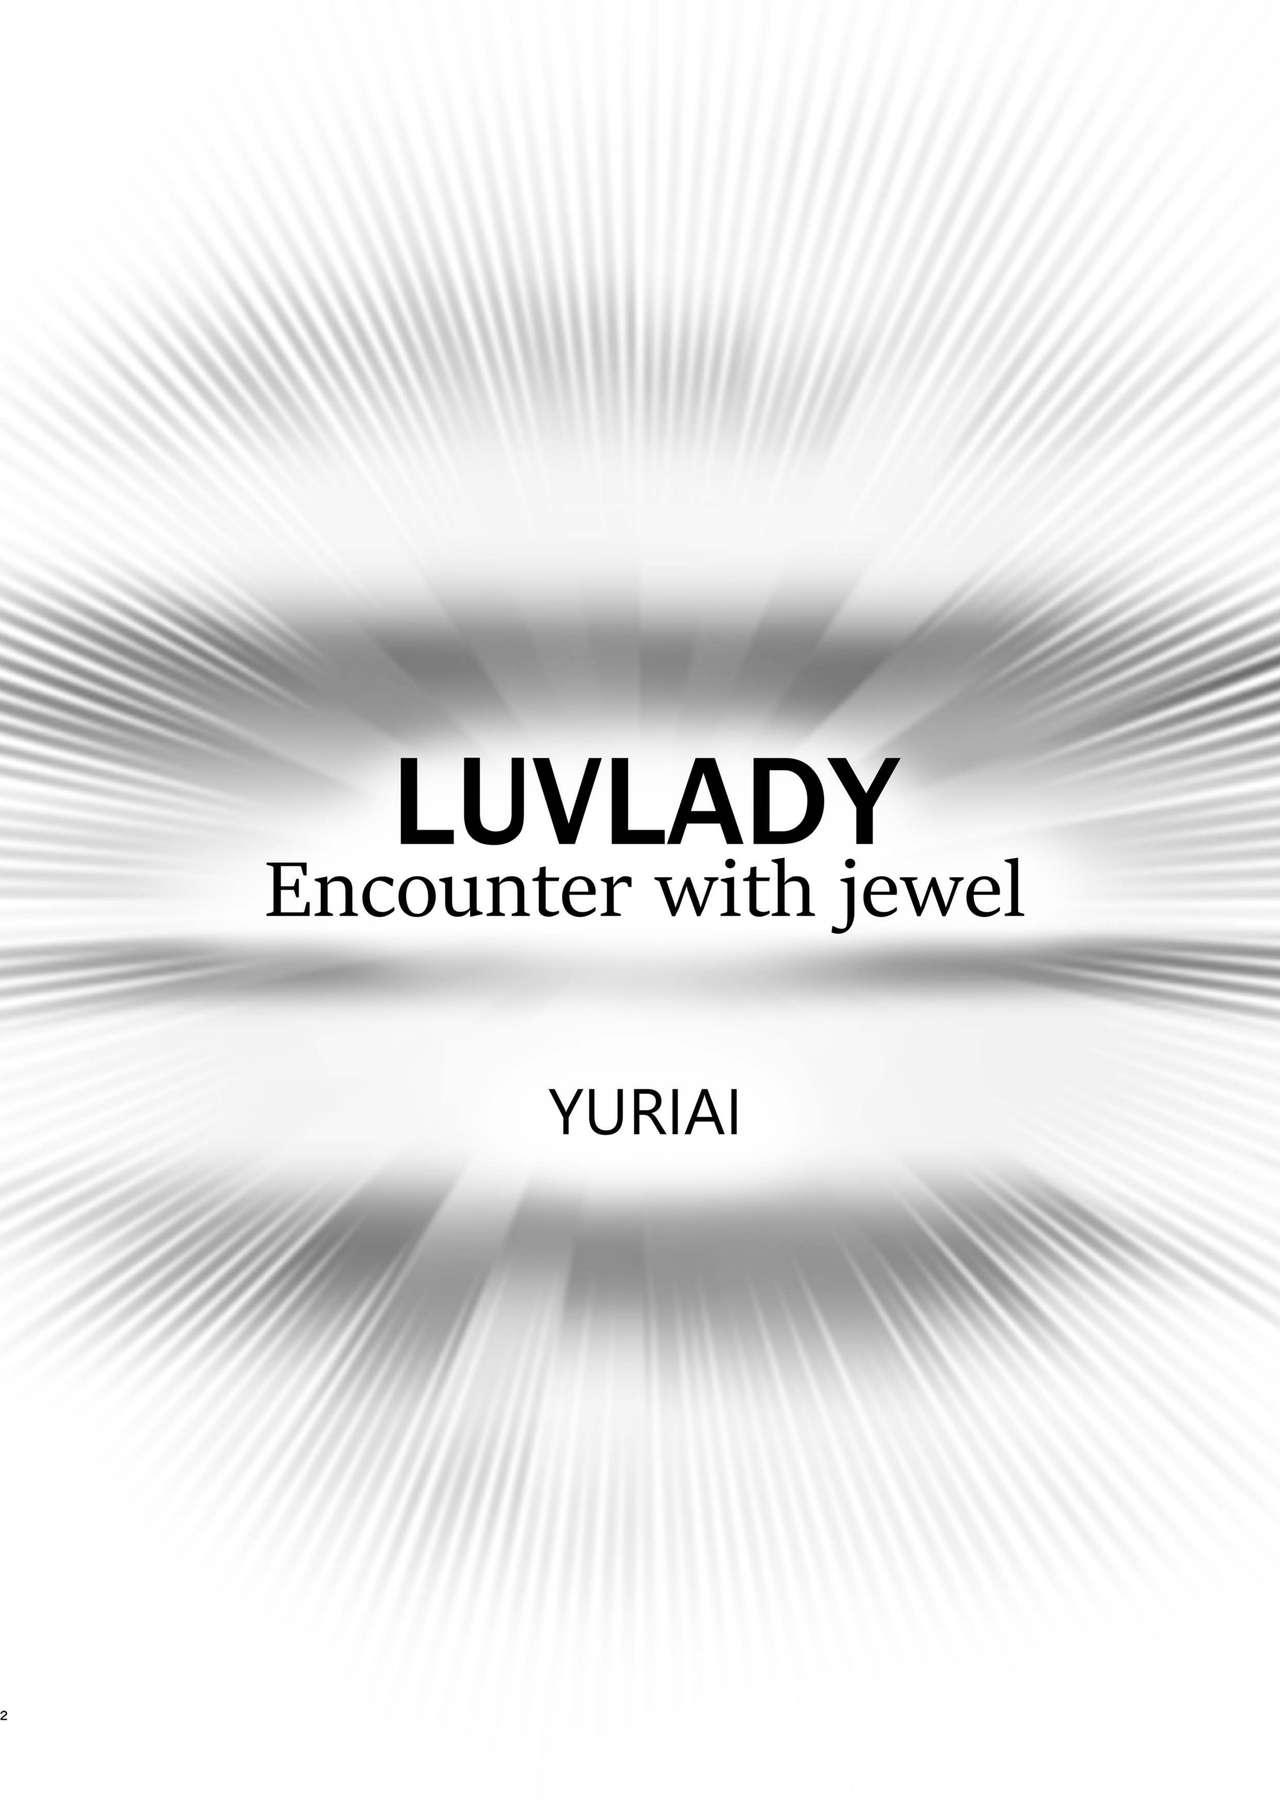 Handsome LUVLADY Encounter with jewel - Ultraman Argentina - Page 2